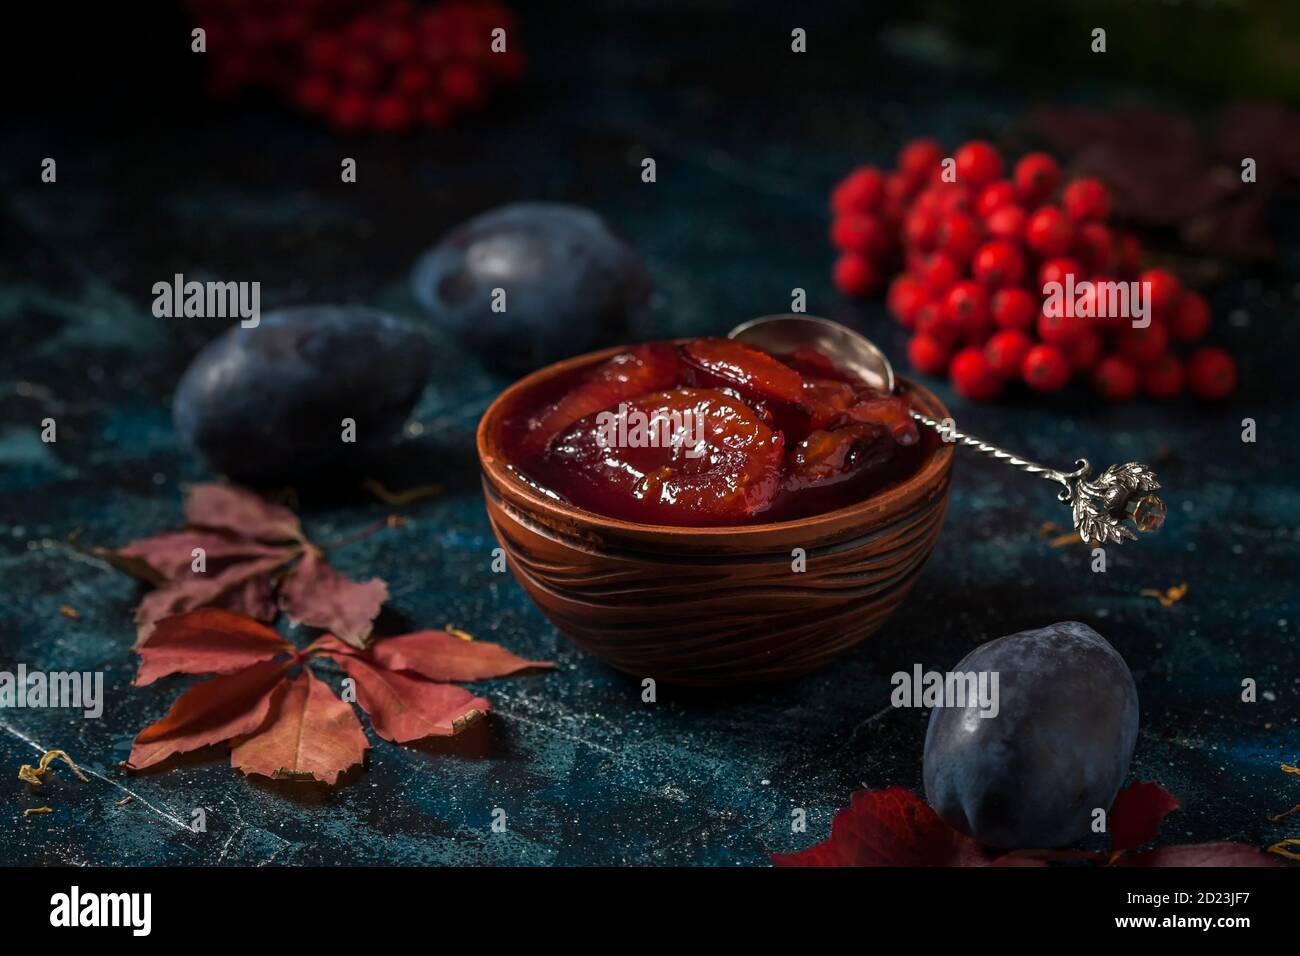 Homemade plum jam and fruits on a wooden table. Stock Photo